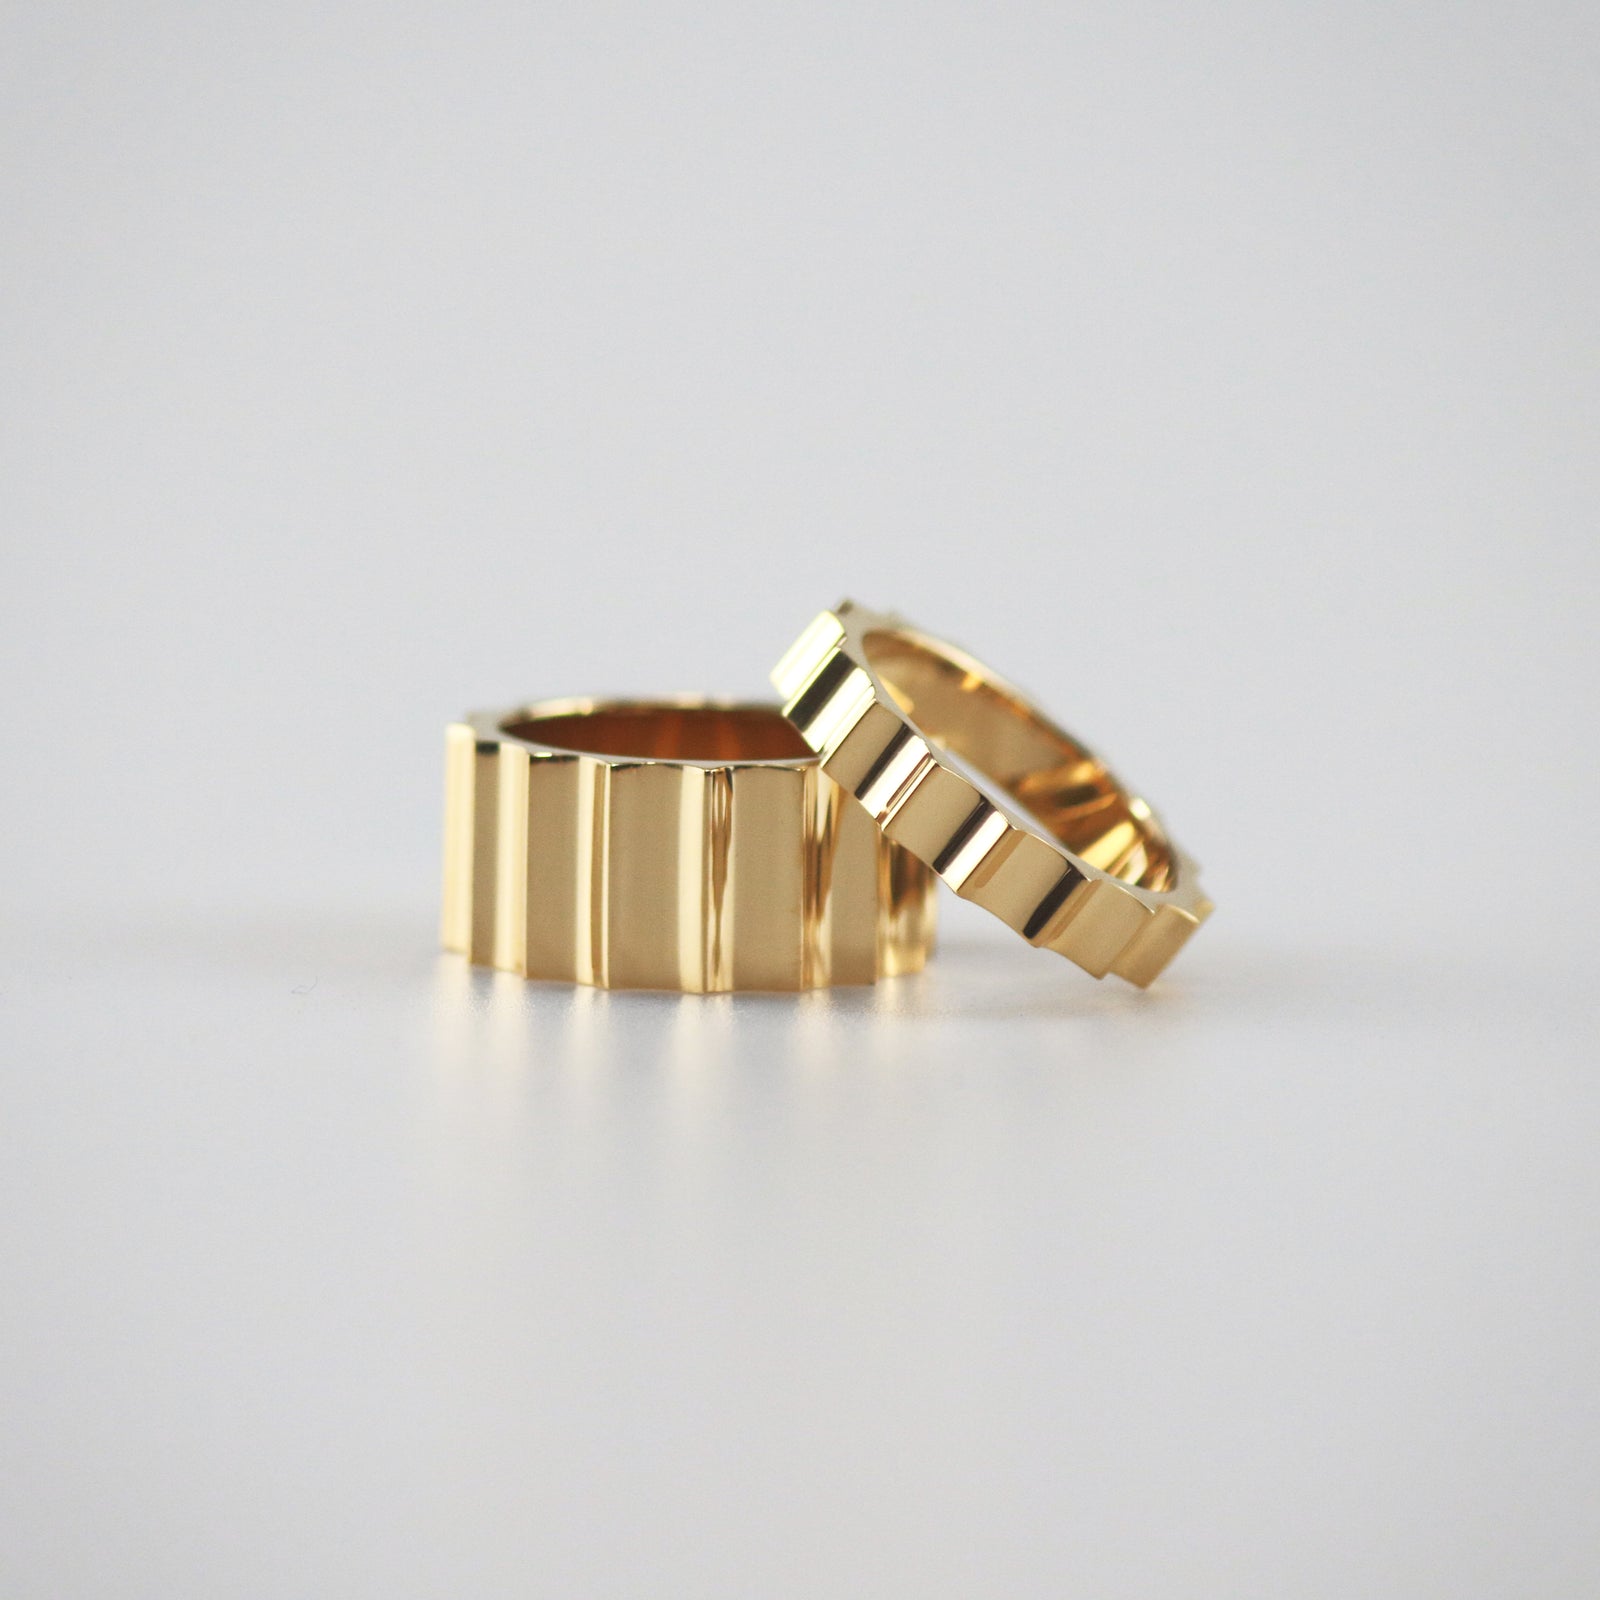 Fluted Thin Band Ring